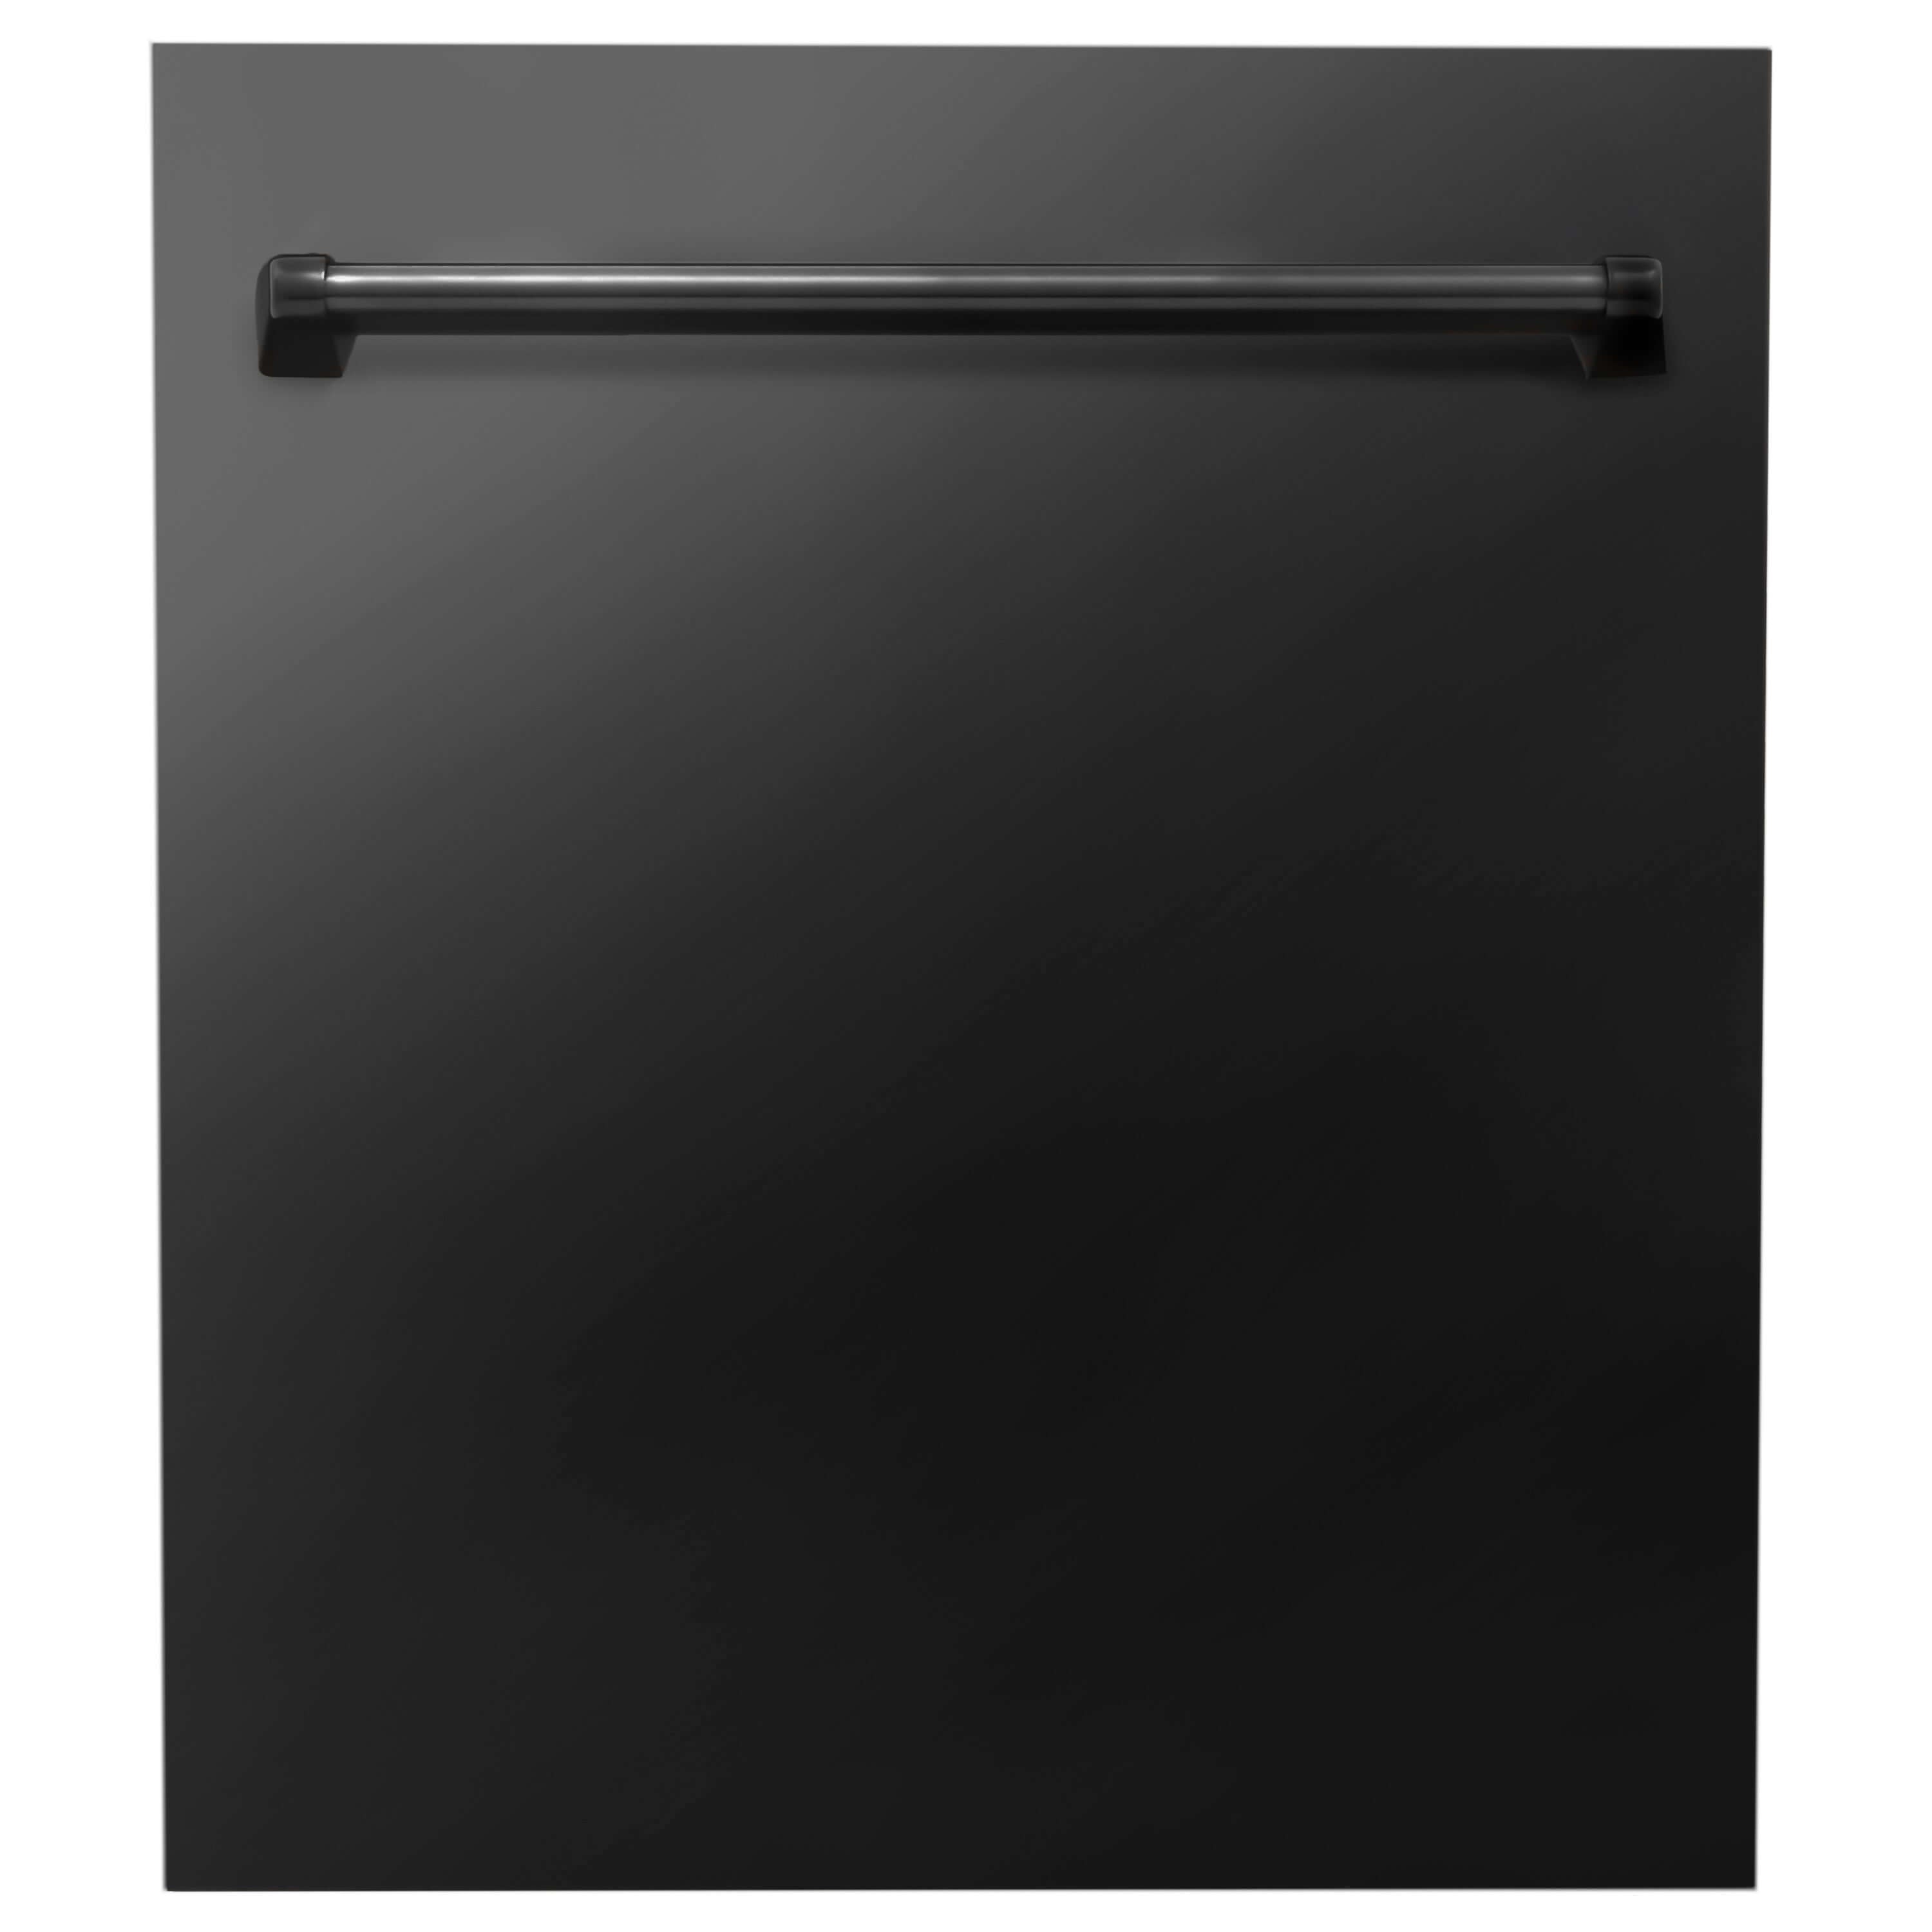 ZLINE 24 in. Black Stainless Top Control Built-In Dishwasher with Stainless Steel Tub and Traditional Style Handle, 52dBa (DW-BS-24) front, closed.